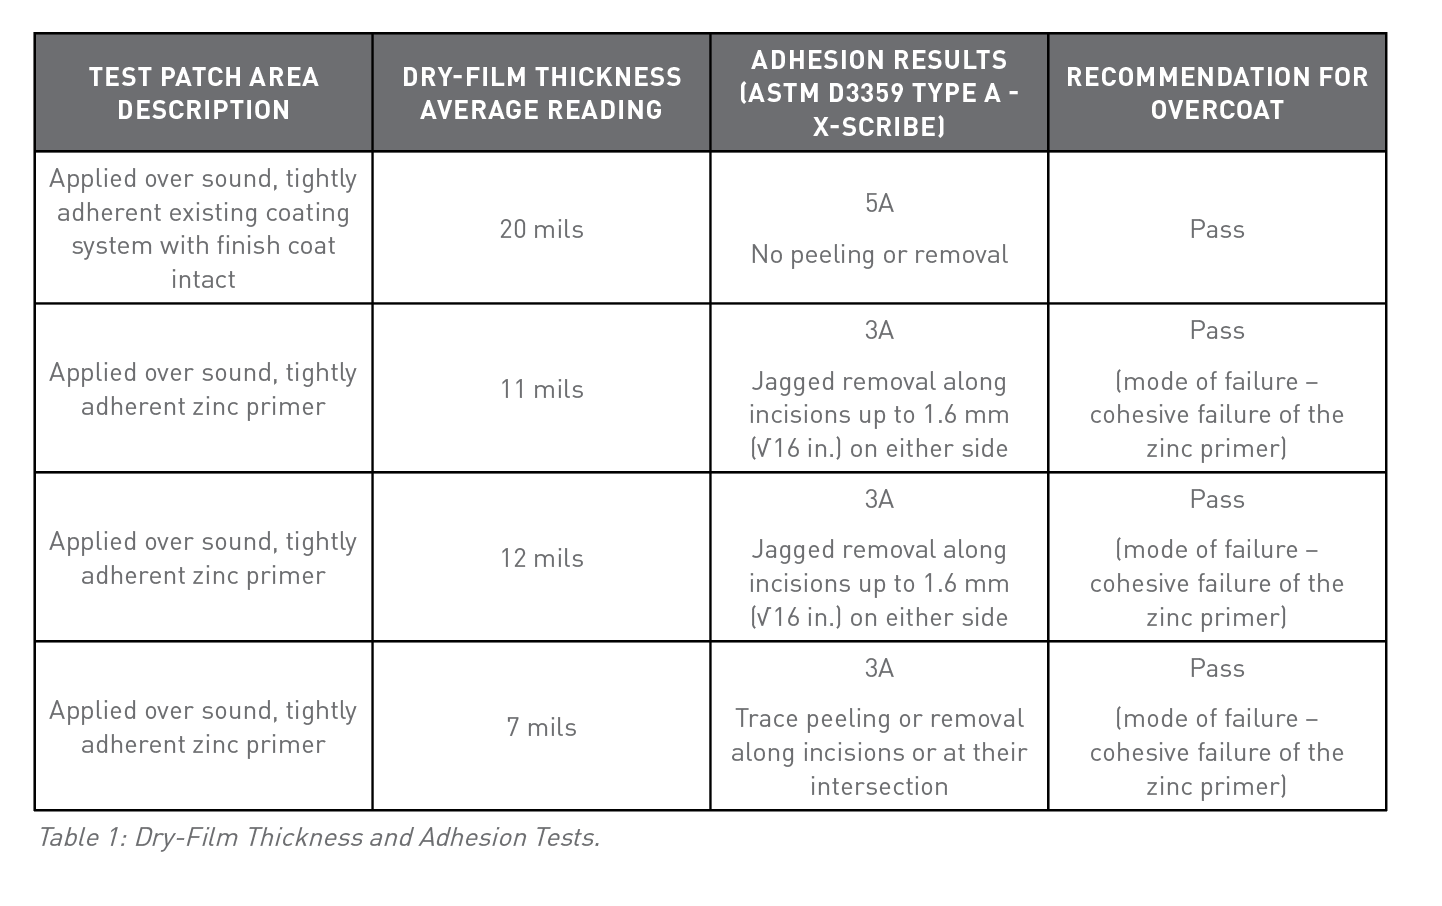 Table 1: Dry-Film Thickness and Adhesion Tests